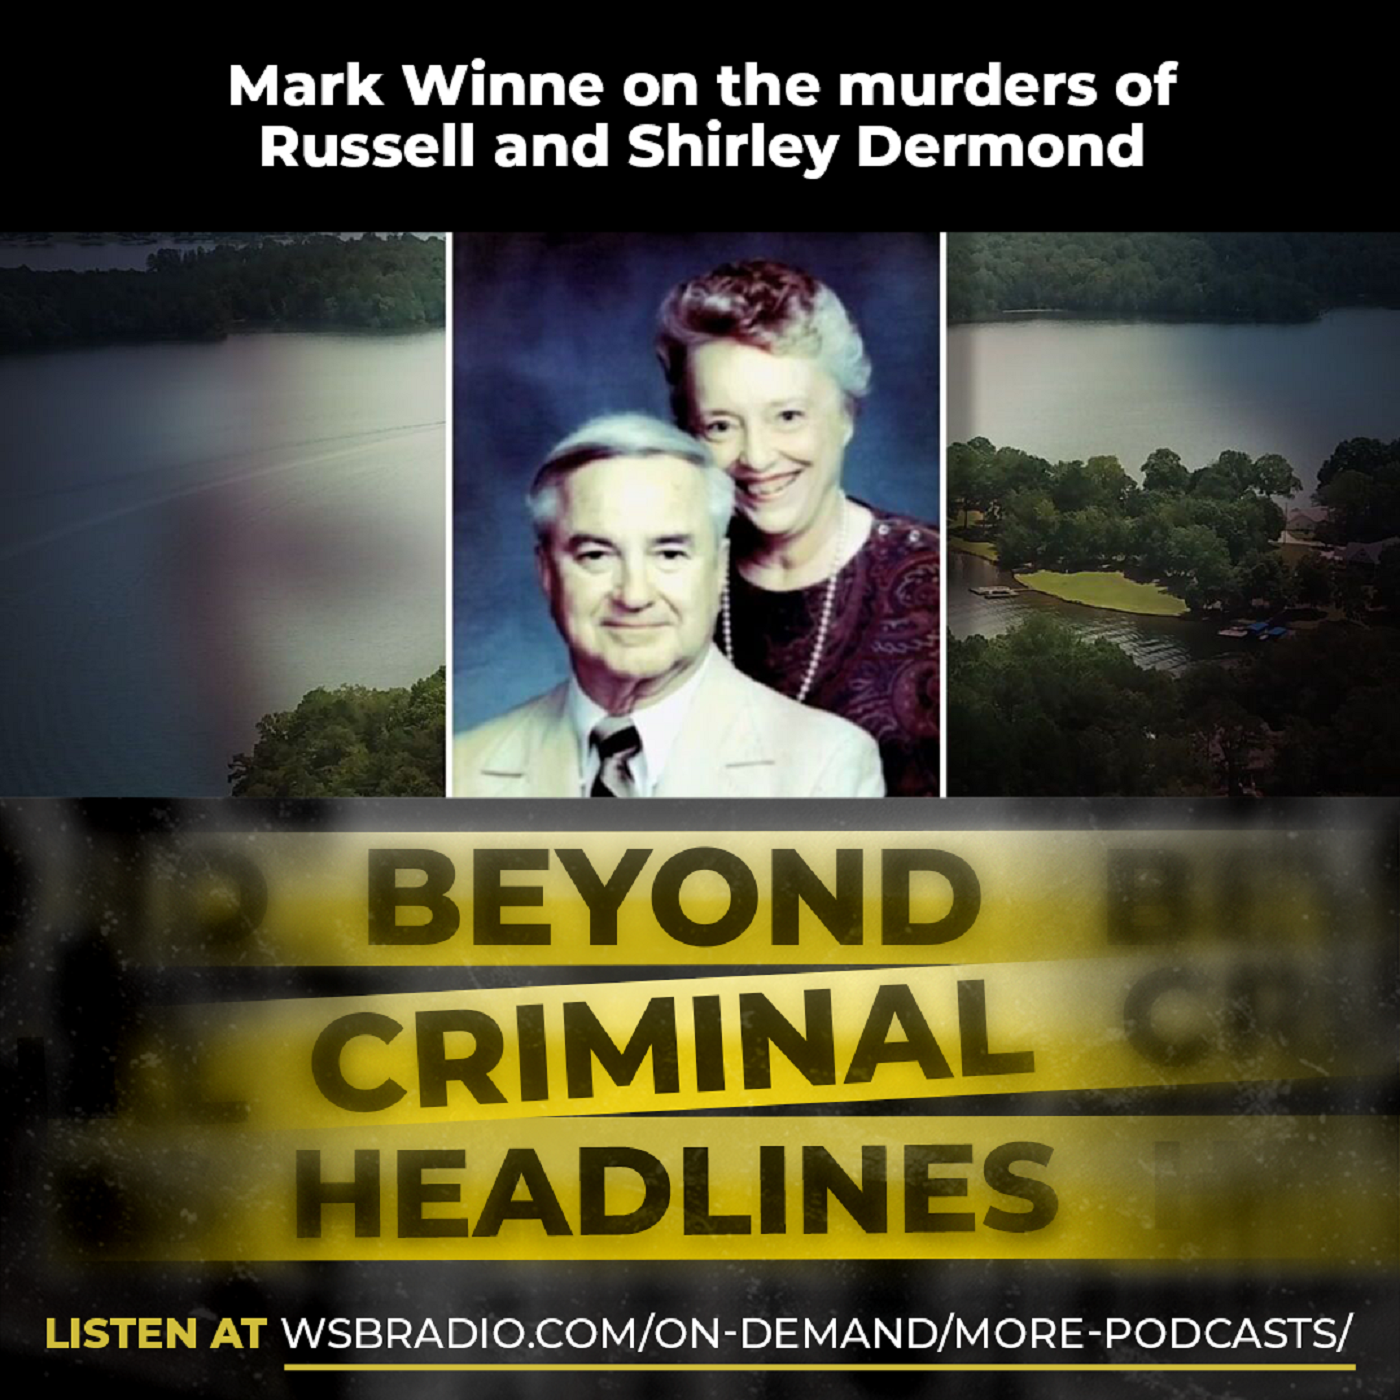 Mark Winne on the murders of Russell and Shirley Dermond